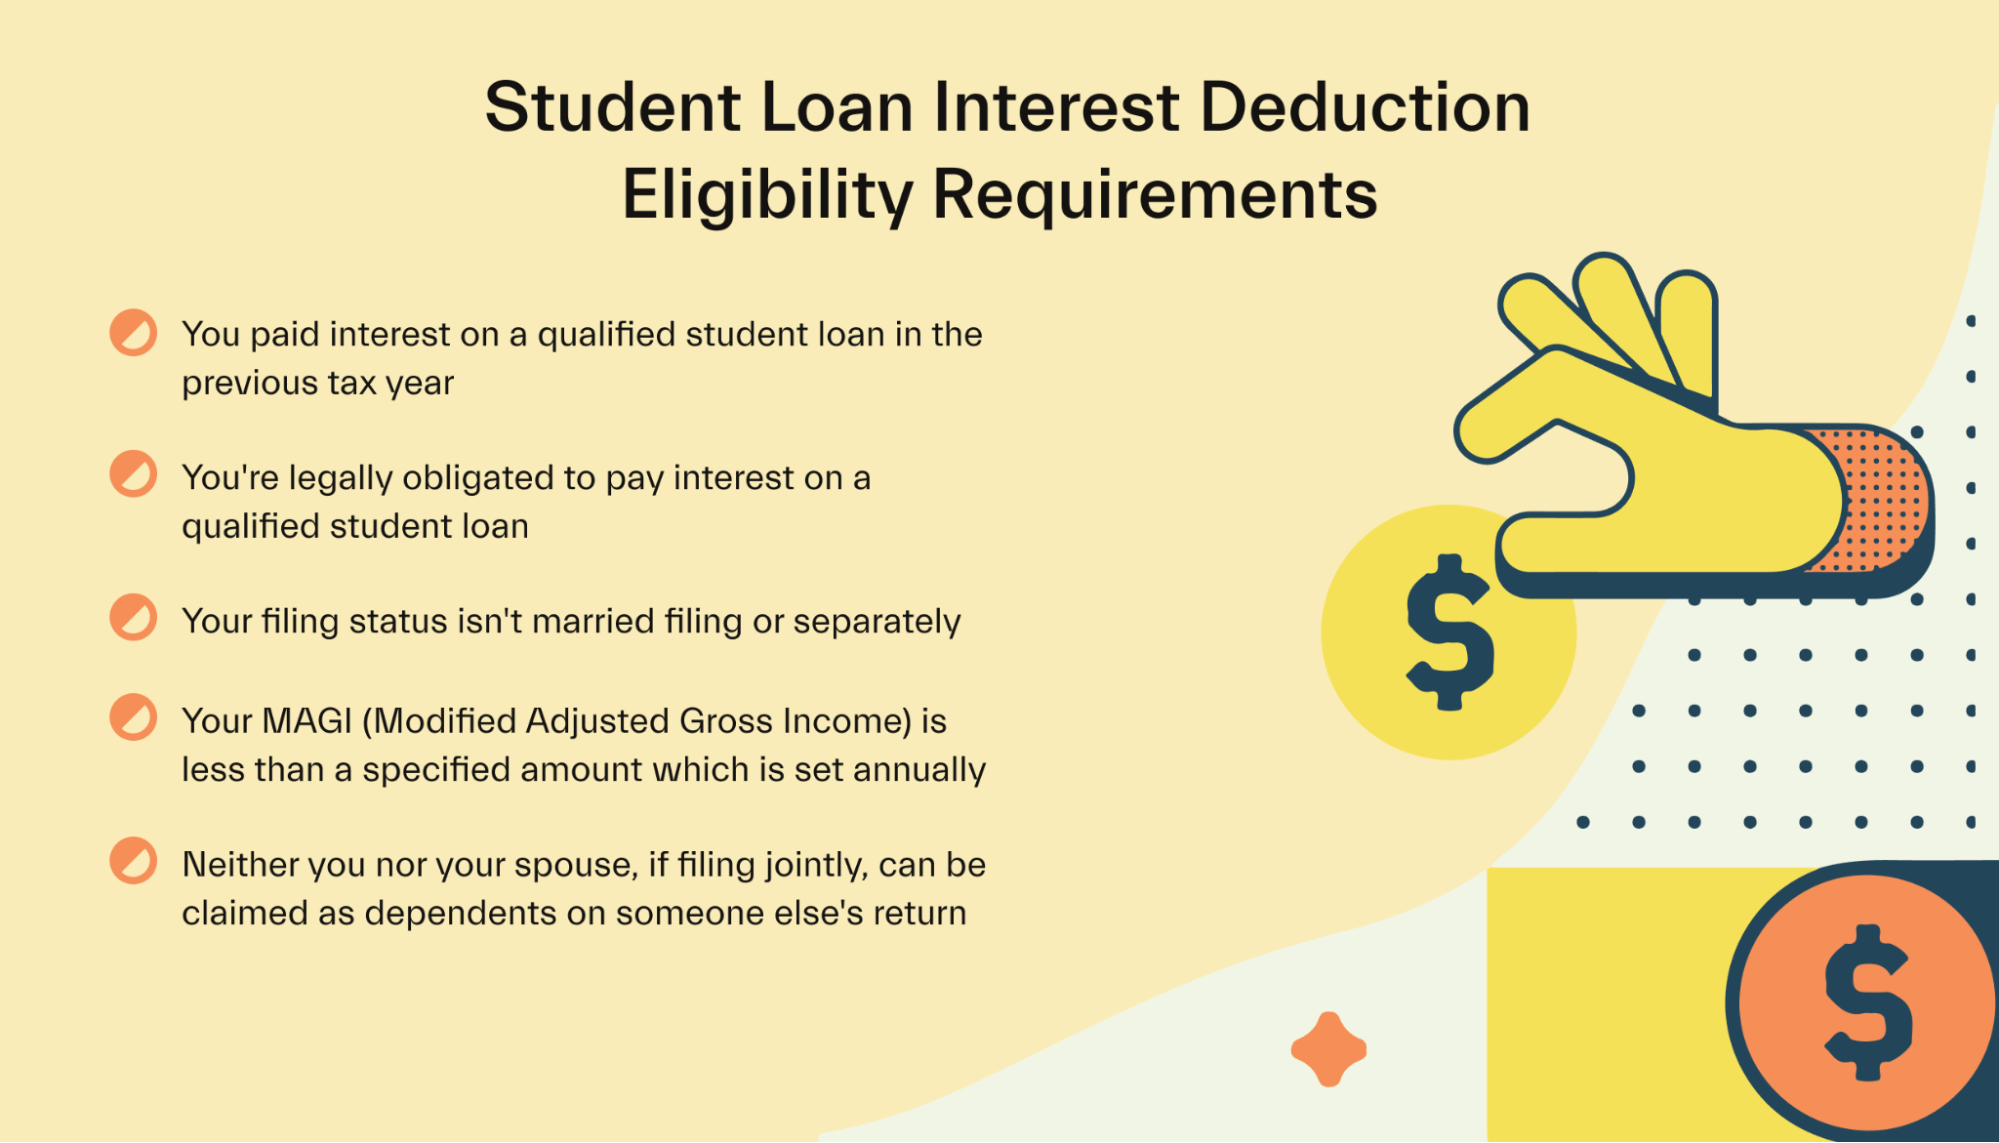 Student loan interest deduction eligibility requirements